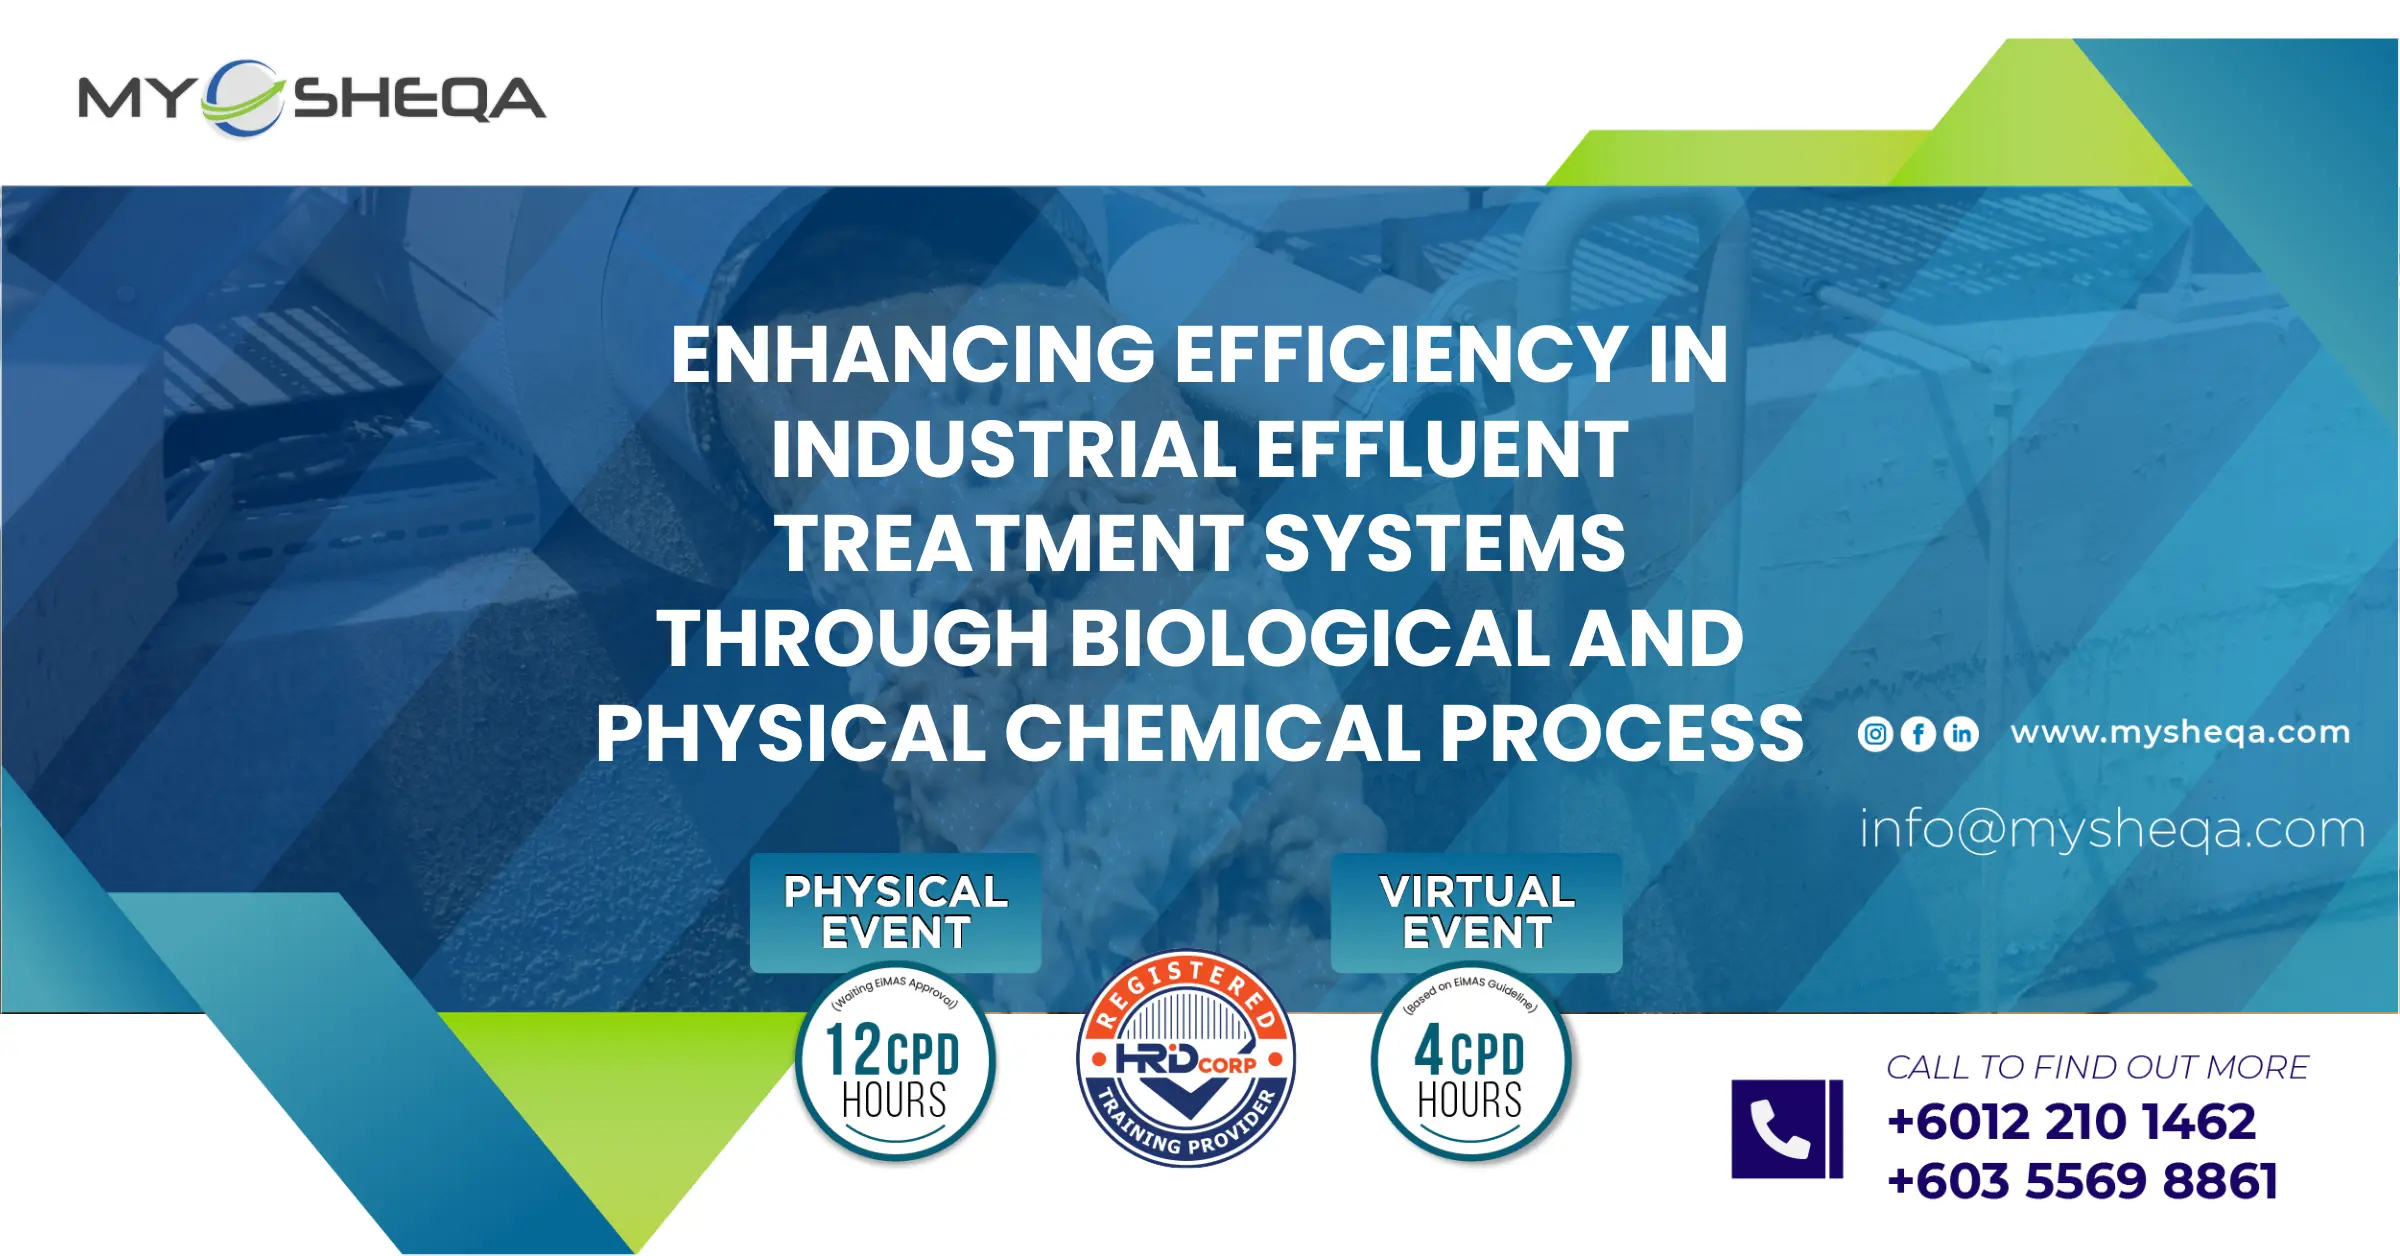 Enhancing Efficiency InIndustrial Effluent Treatment Systems Through Biological and Physical Chemical Process